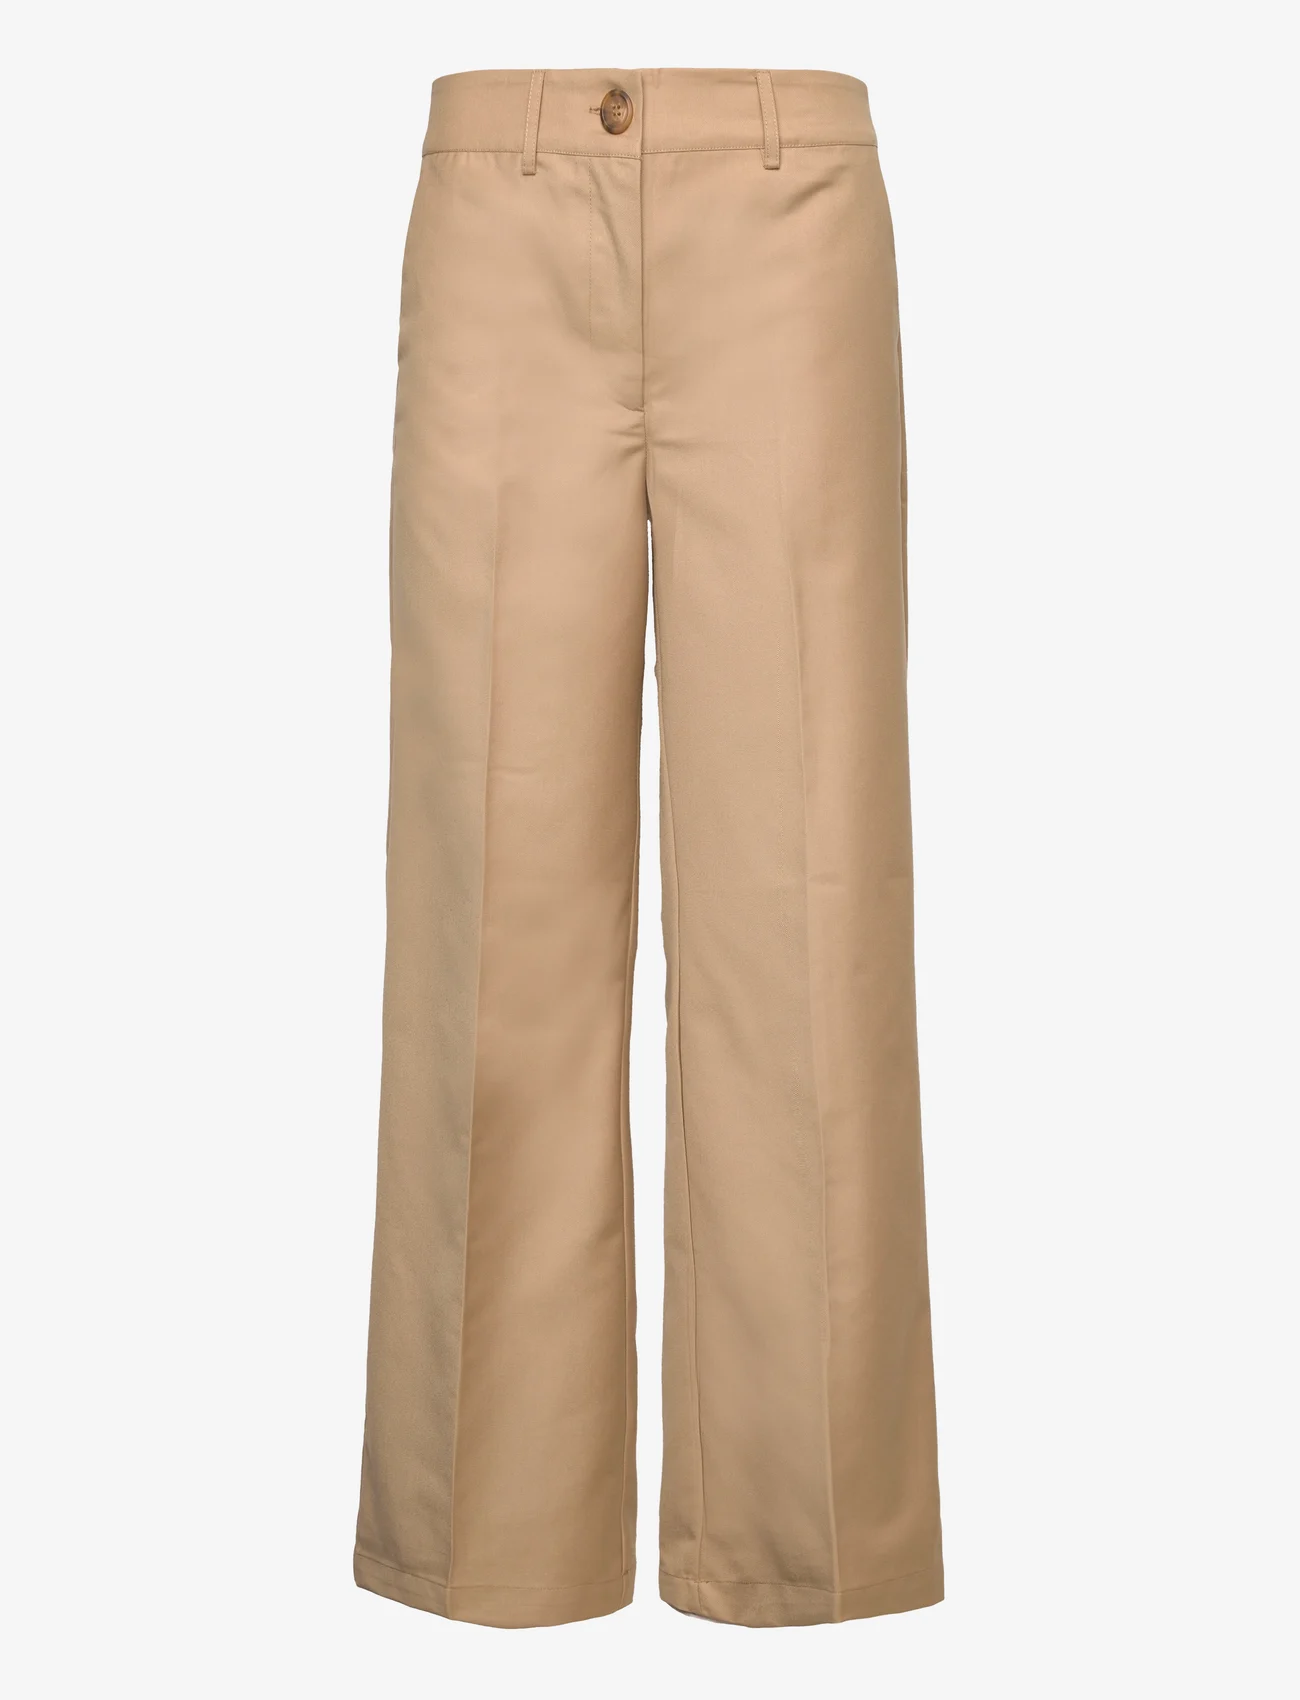 Sofie Schnoor - Trousers - wide leg trousers - camel - 0